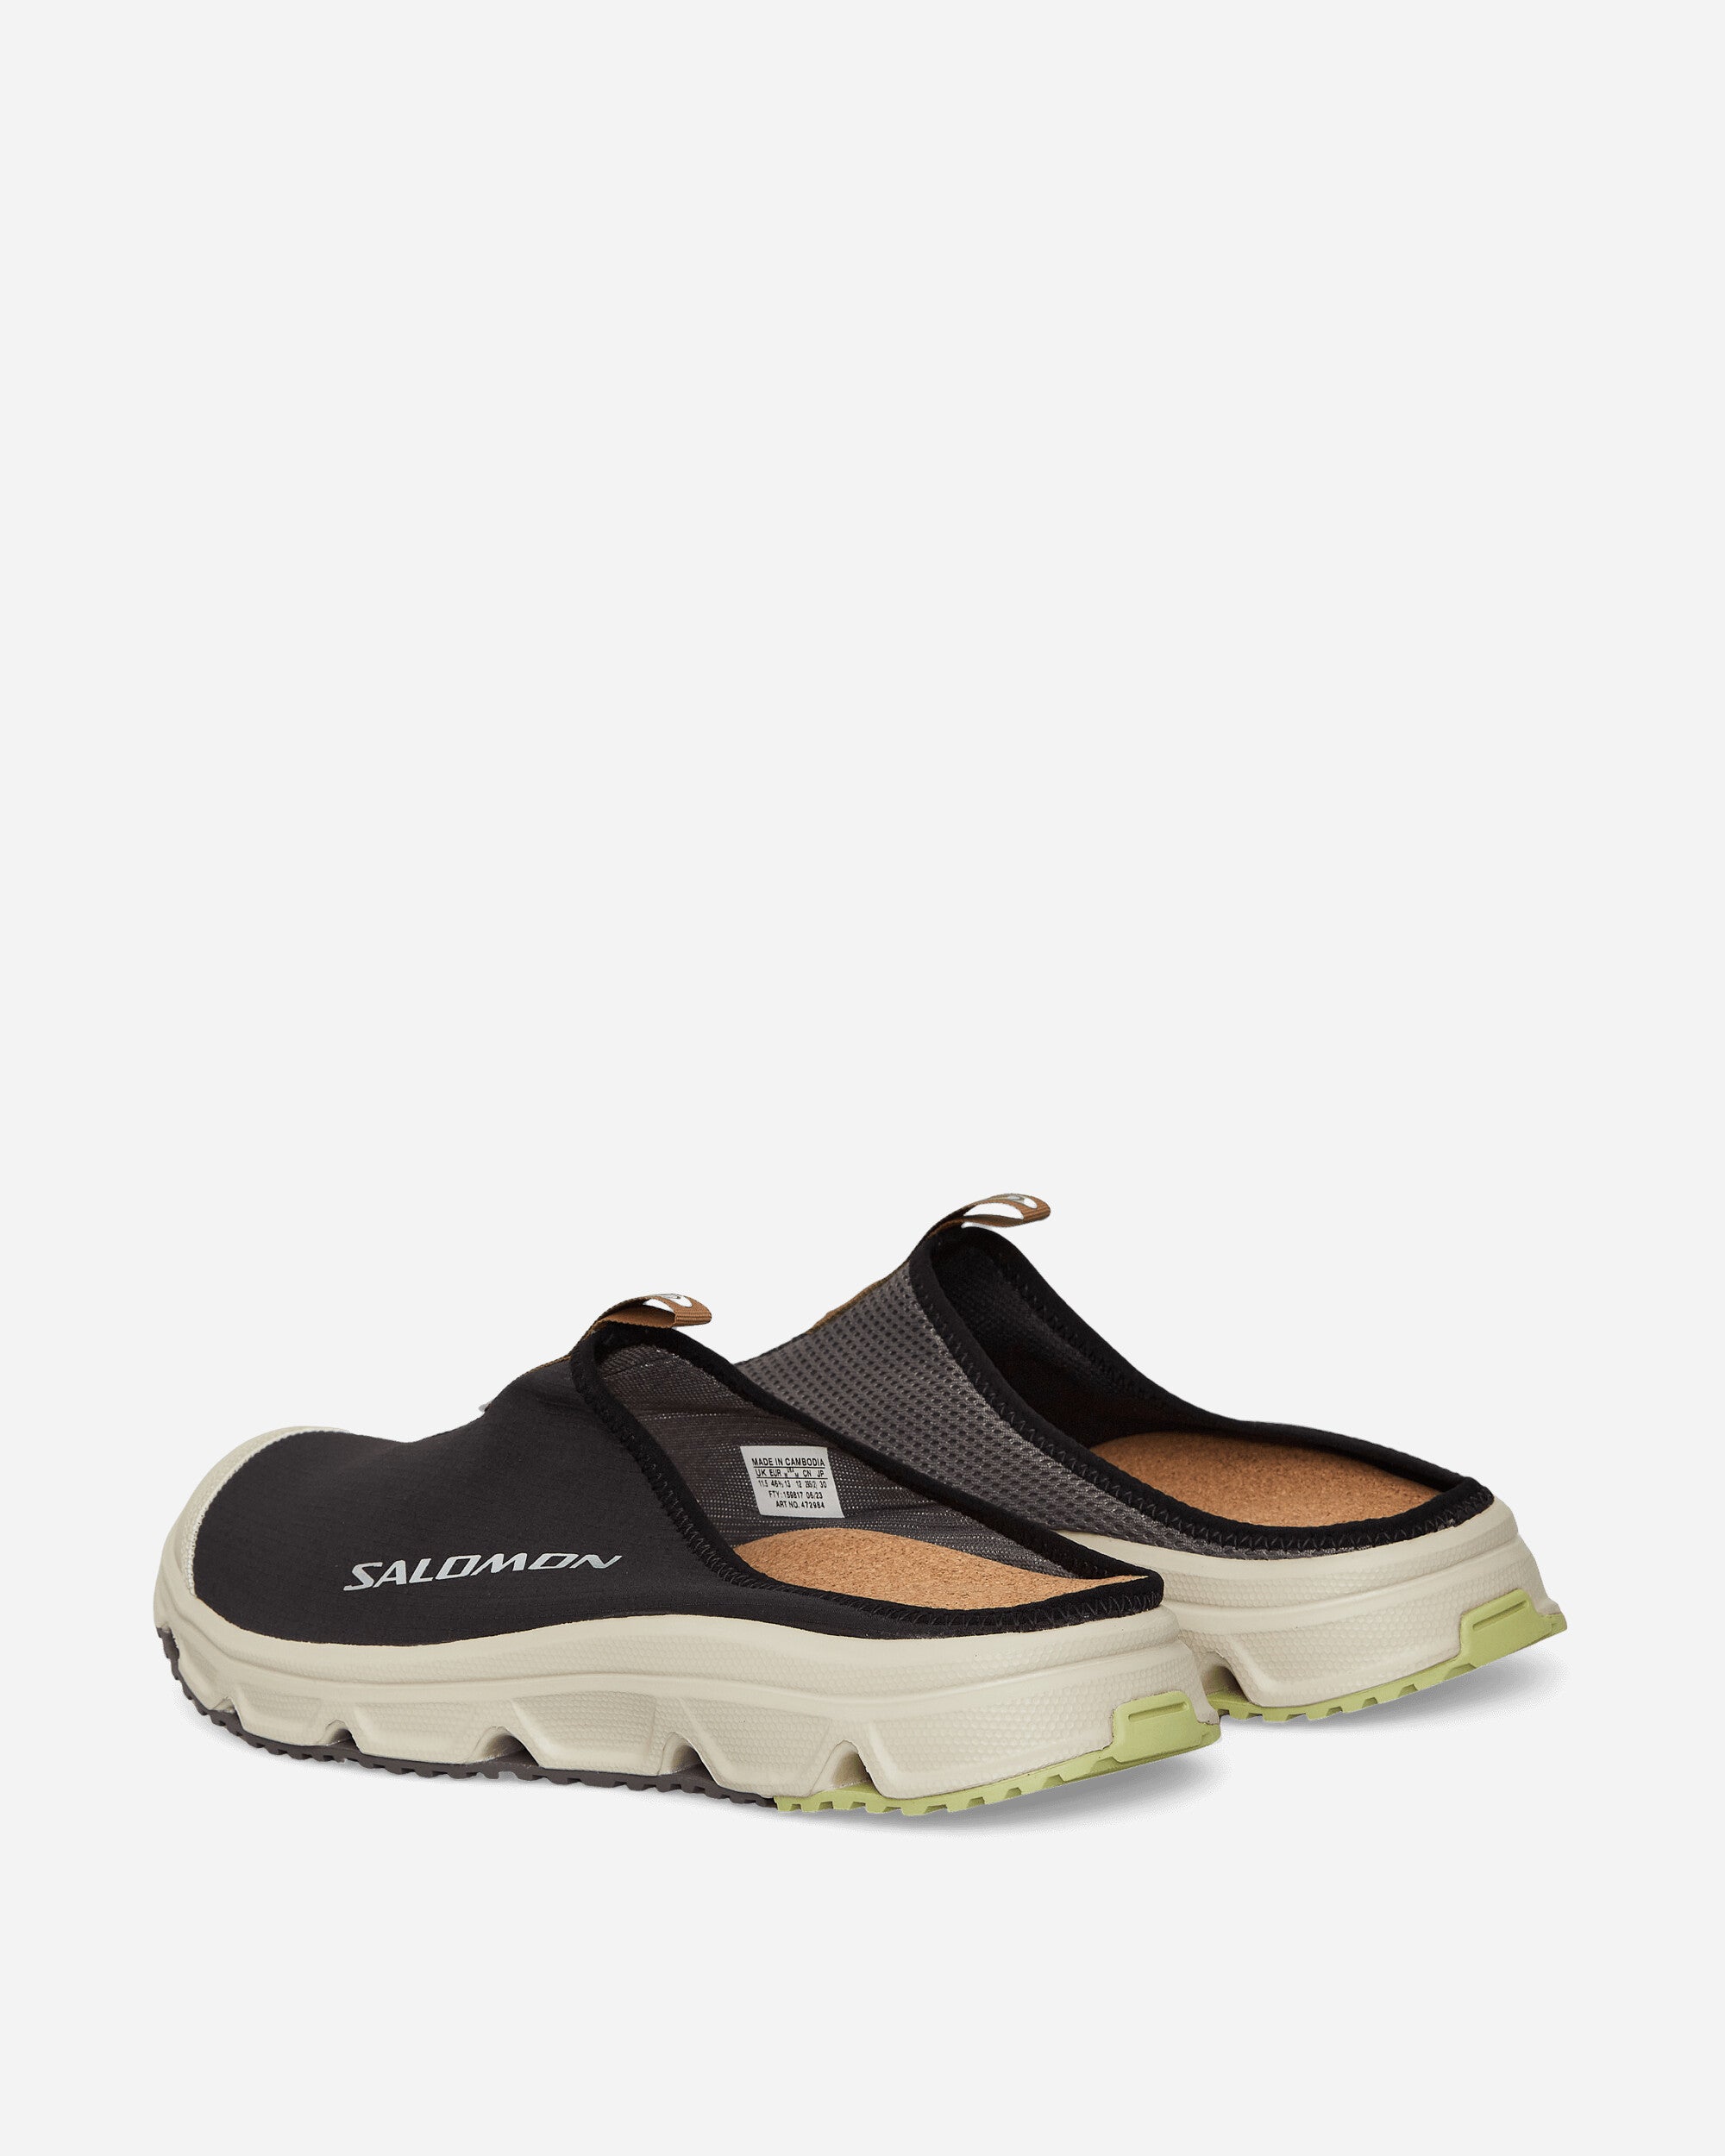 Salomon Rx Slide 3.0 Black/Plum Kitten/Feather Gray Sandals and Slides Sandals and Mules L47298400